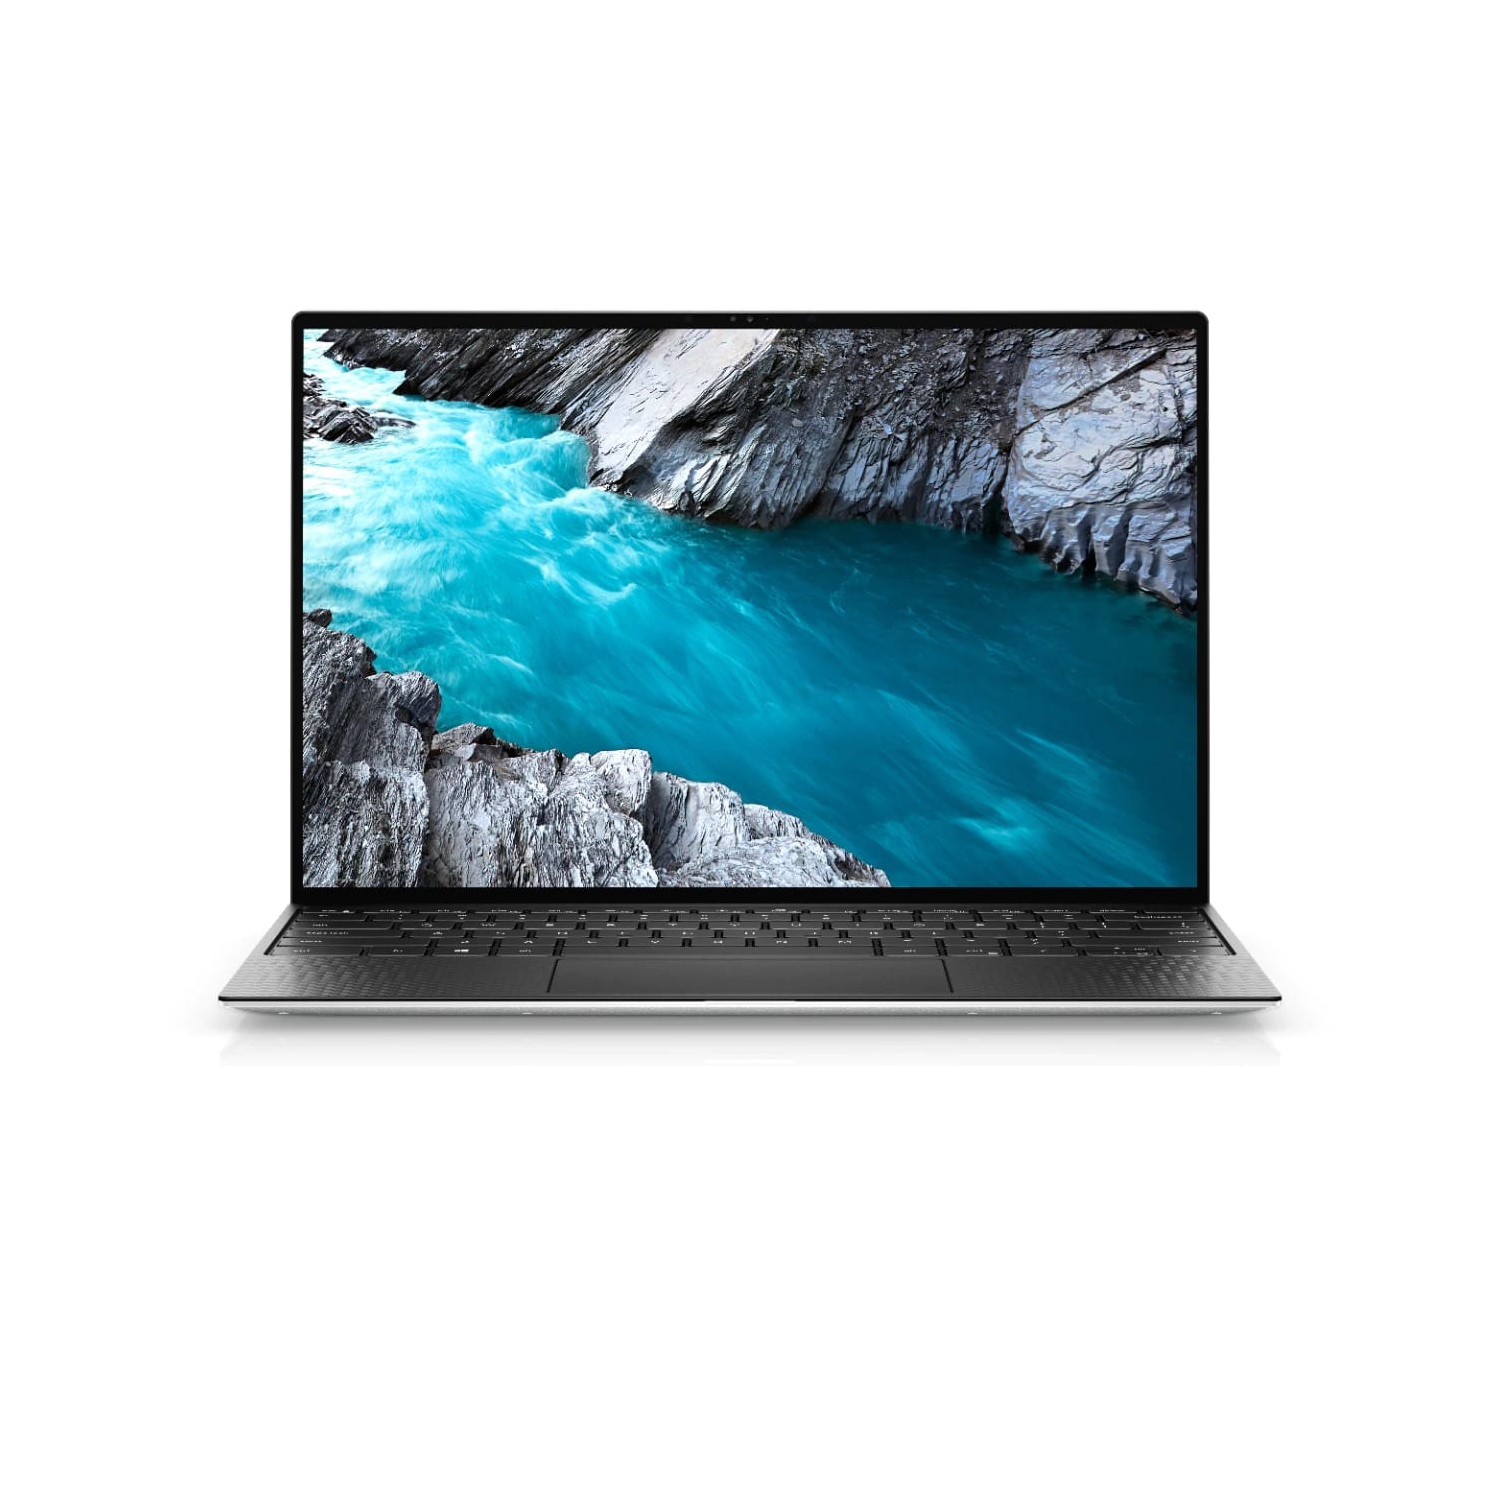 Refurbished (Excellent) - Dell XPS 13 9300 Laptop (2020) | 13.3" FHD+ | Core i5 - 1TB SSD - 8GB RAM | 4 Cores @ 3.6 GHz - 10th Gen CPU Certified Refurbished